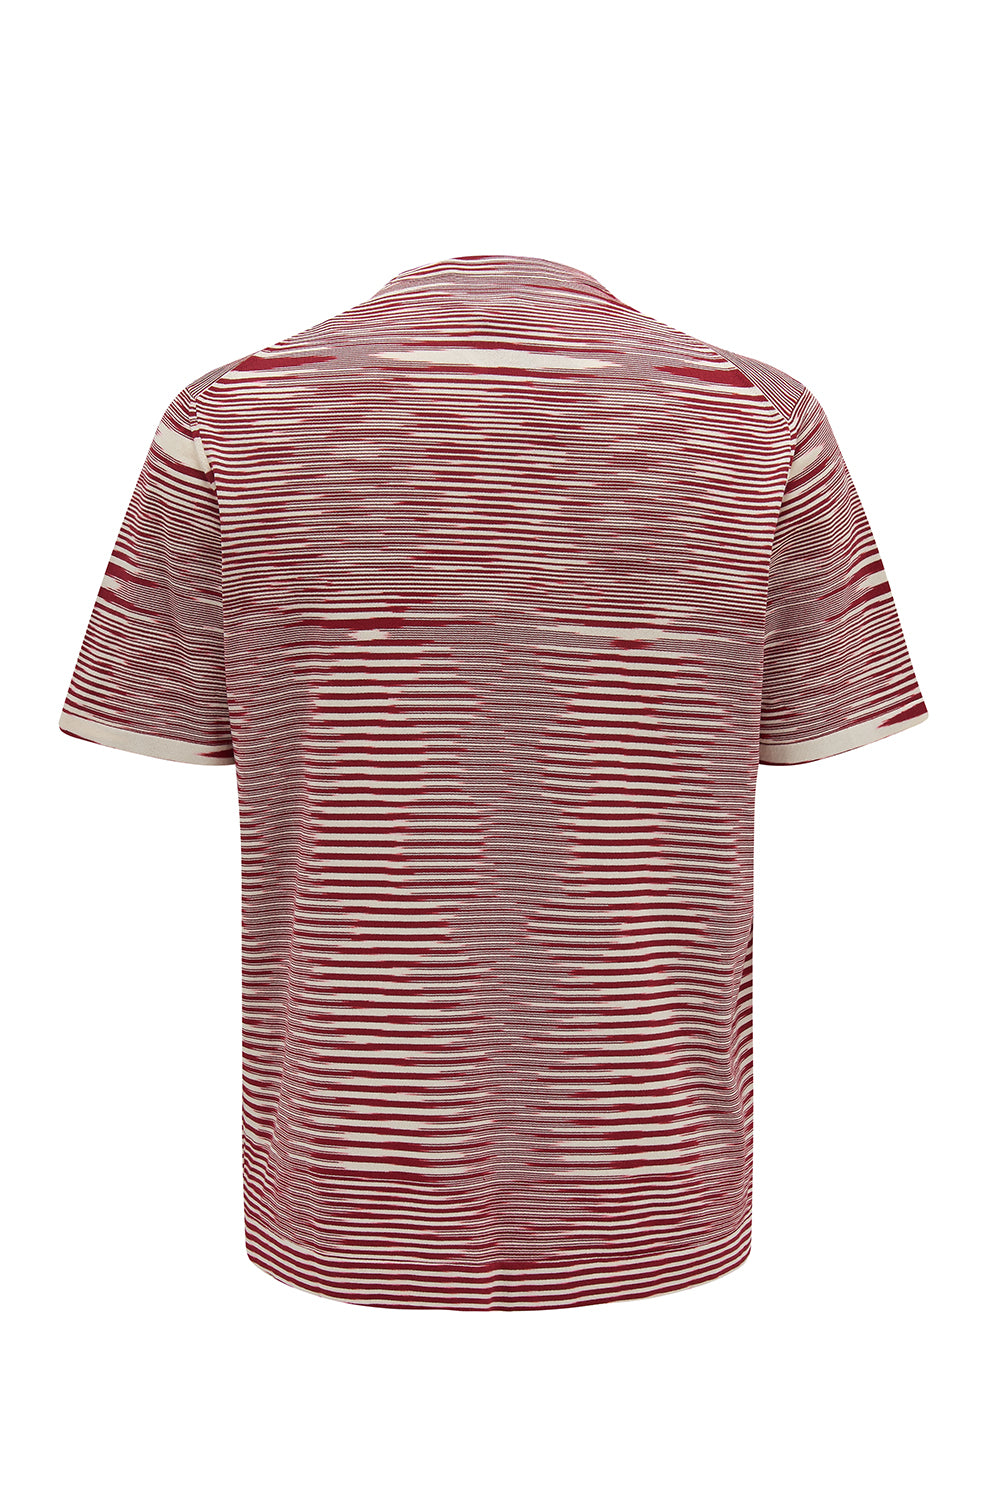 Missoni Men’s Space-dyed Stripe Top Red - Back View